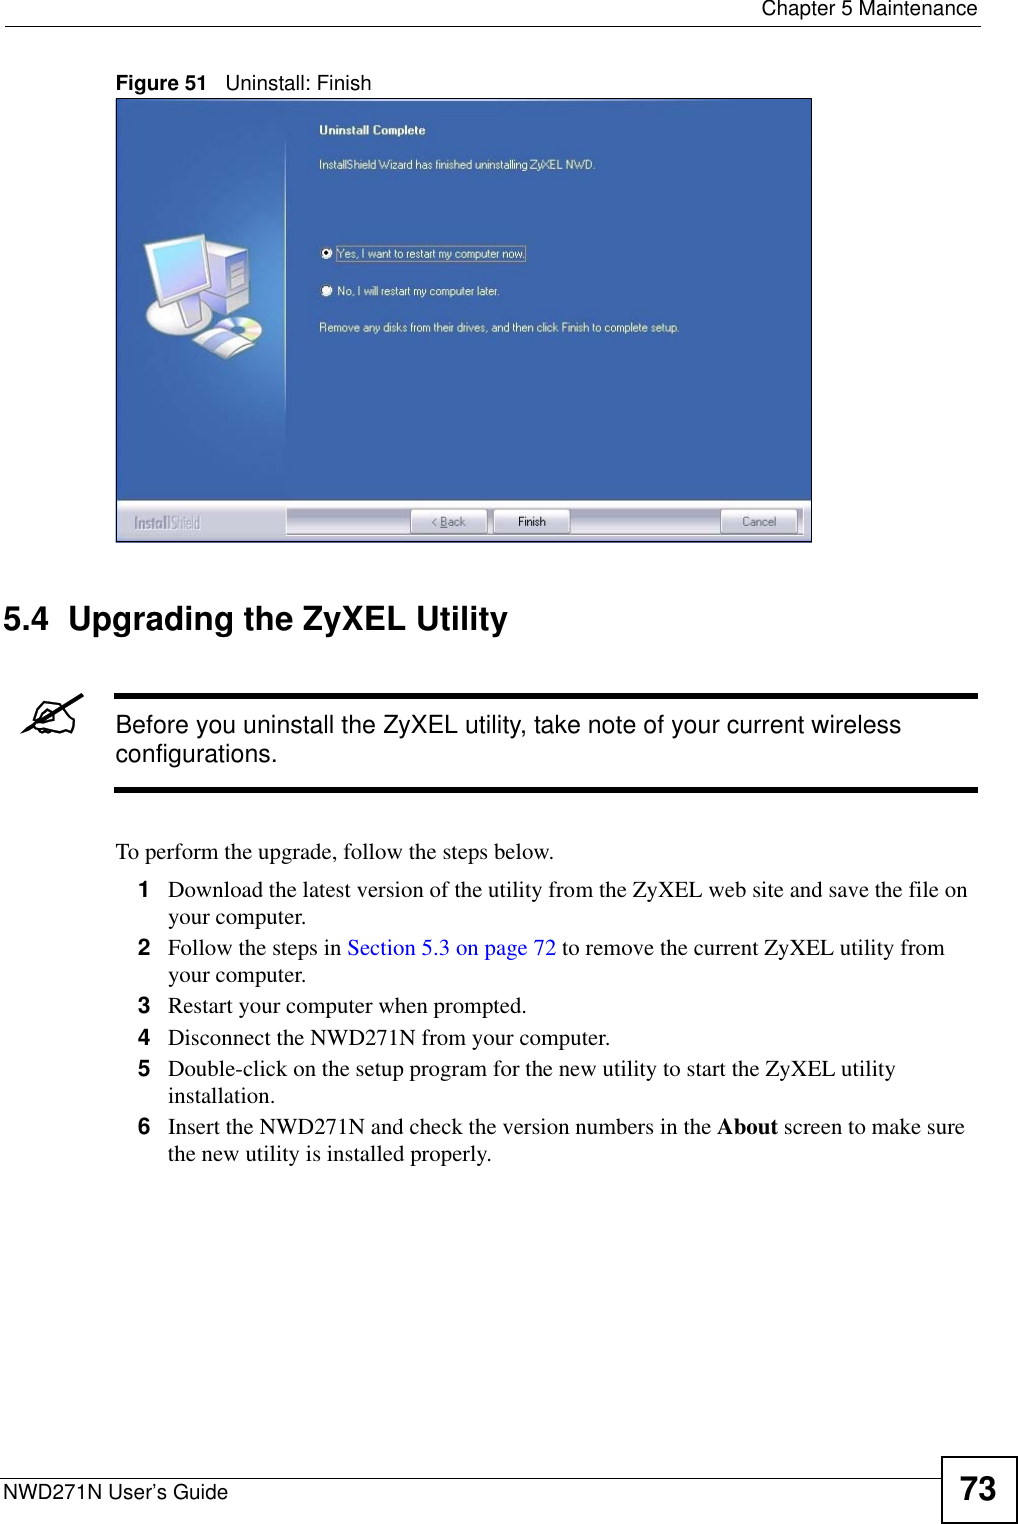  Chapter 5 MaintenanceNWD271N User’s Guide 73Figure 51   Uninstall: Finish 5.4  Upgrading the ZyXEL Utility&quot;Before you uninstall the ZyXEL utility, take note of your current wireless configurations.To perform the upgrade, follow the steps below.1Download the latest version of the utility from the ZyXEL web site and save the file on your computer.2Follow the steps in Section 5.3 on page 72 to remove the current ZyXEL utility from your computer.3Restart your computer when prompted.4Disconnect the NWD271N from your computer.5Double-click on the setup program for the new utility to start the ZyXEL utility installation.6Insert the NWD271N and check the version numbers in the About screen to make sure the new utility is installed properly.